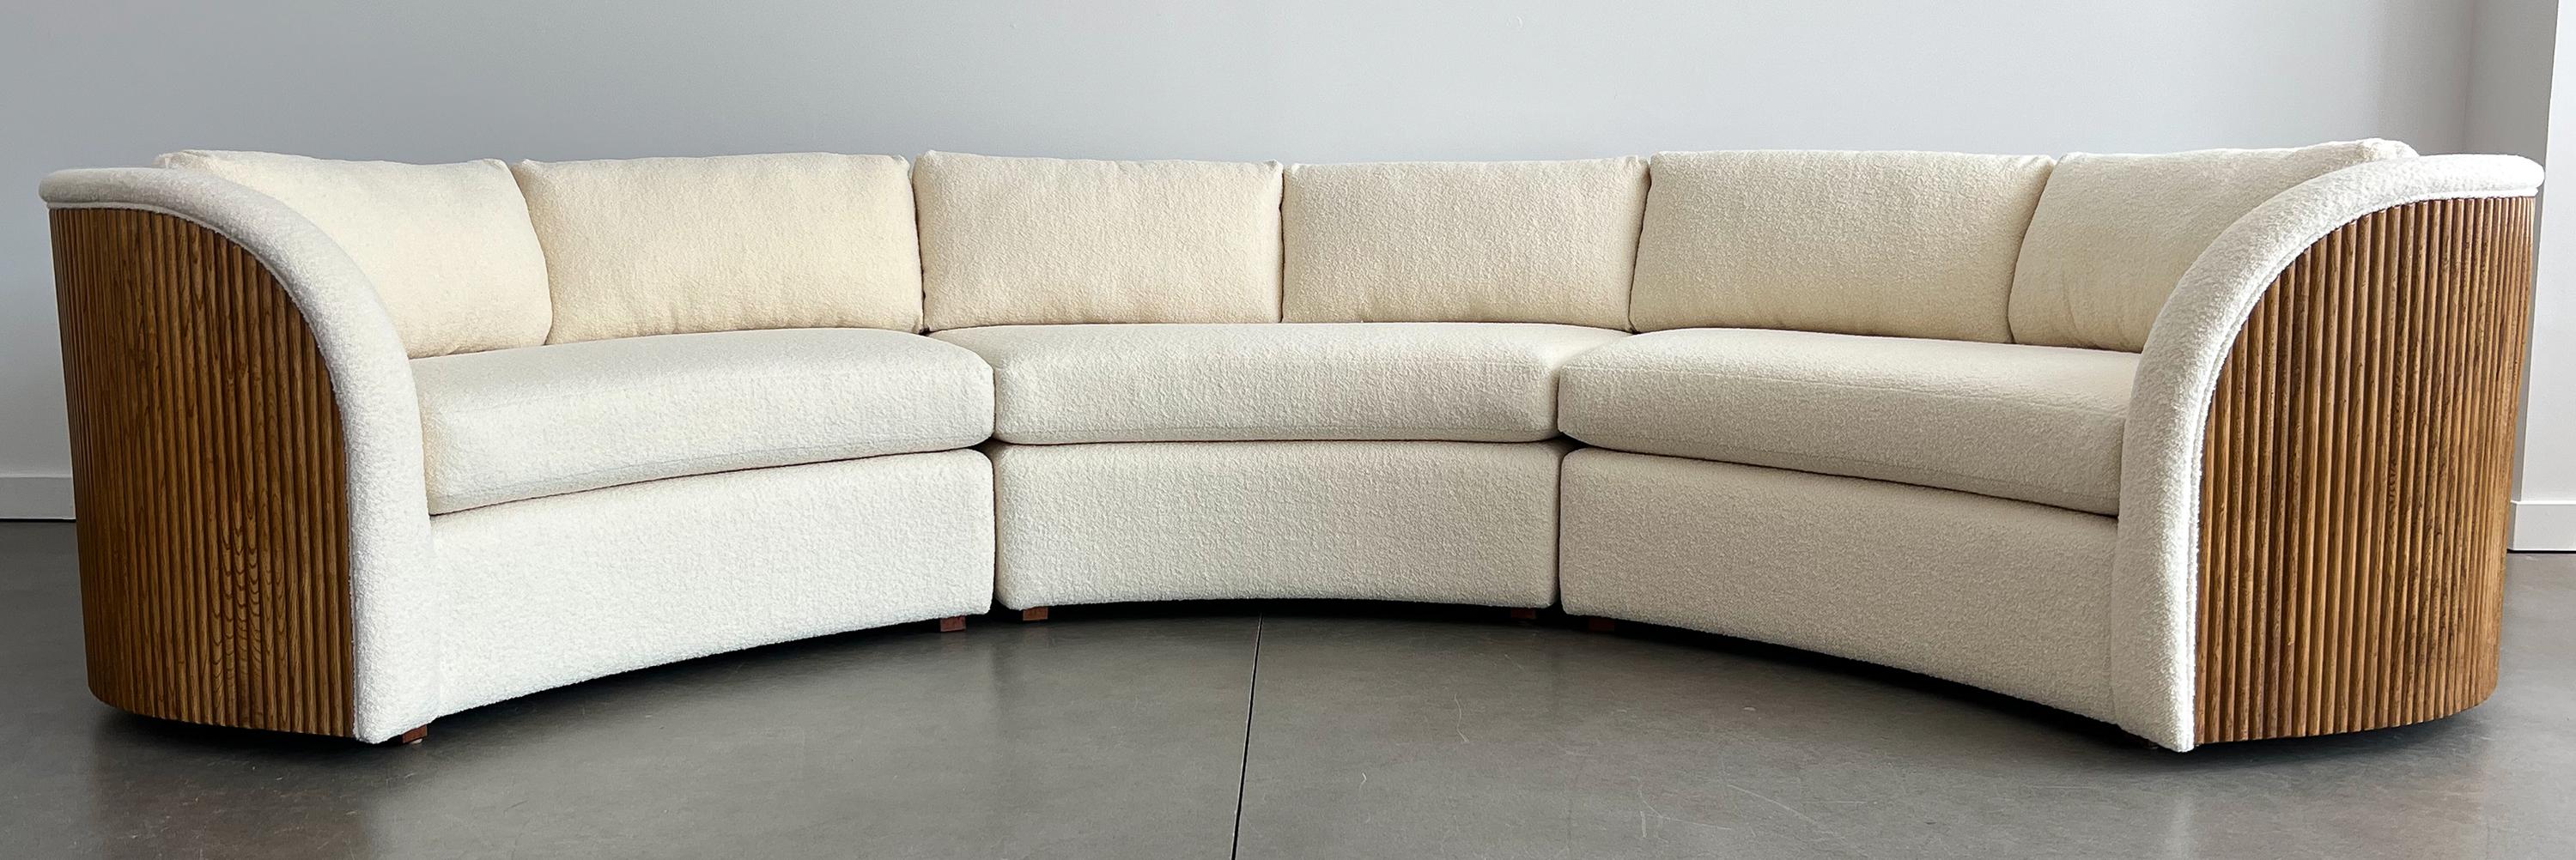 Mid-Century Modern Reeded Oak Wrapped Three Piece Sectional Sofa in Cream Bouclé